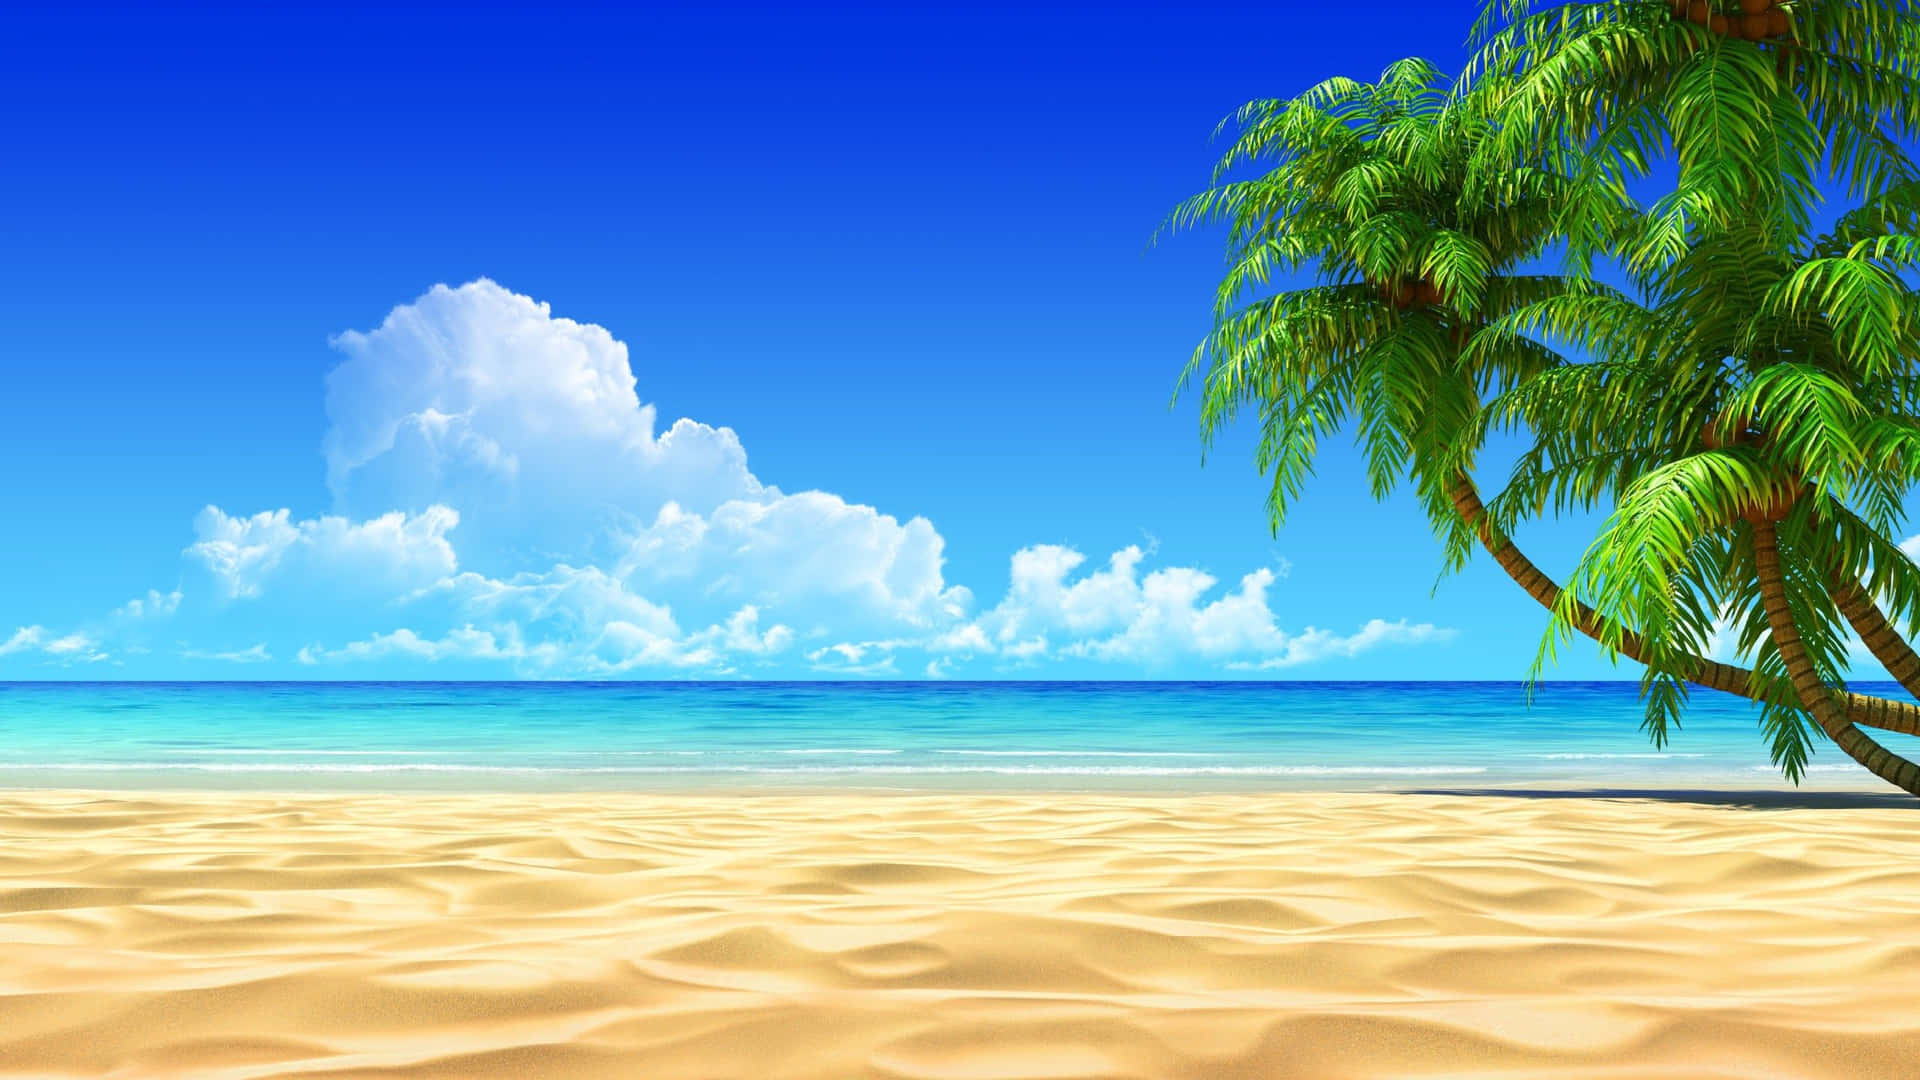 Join Us On The Beach And Find Your Own Piece Of Paradise Background